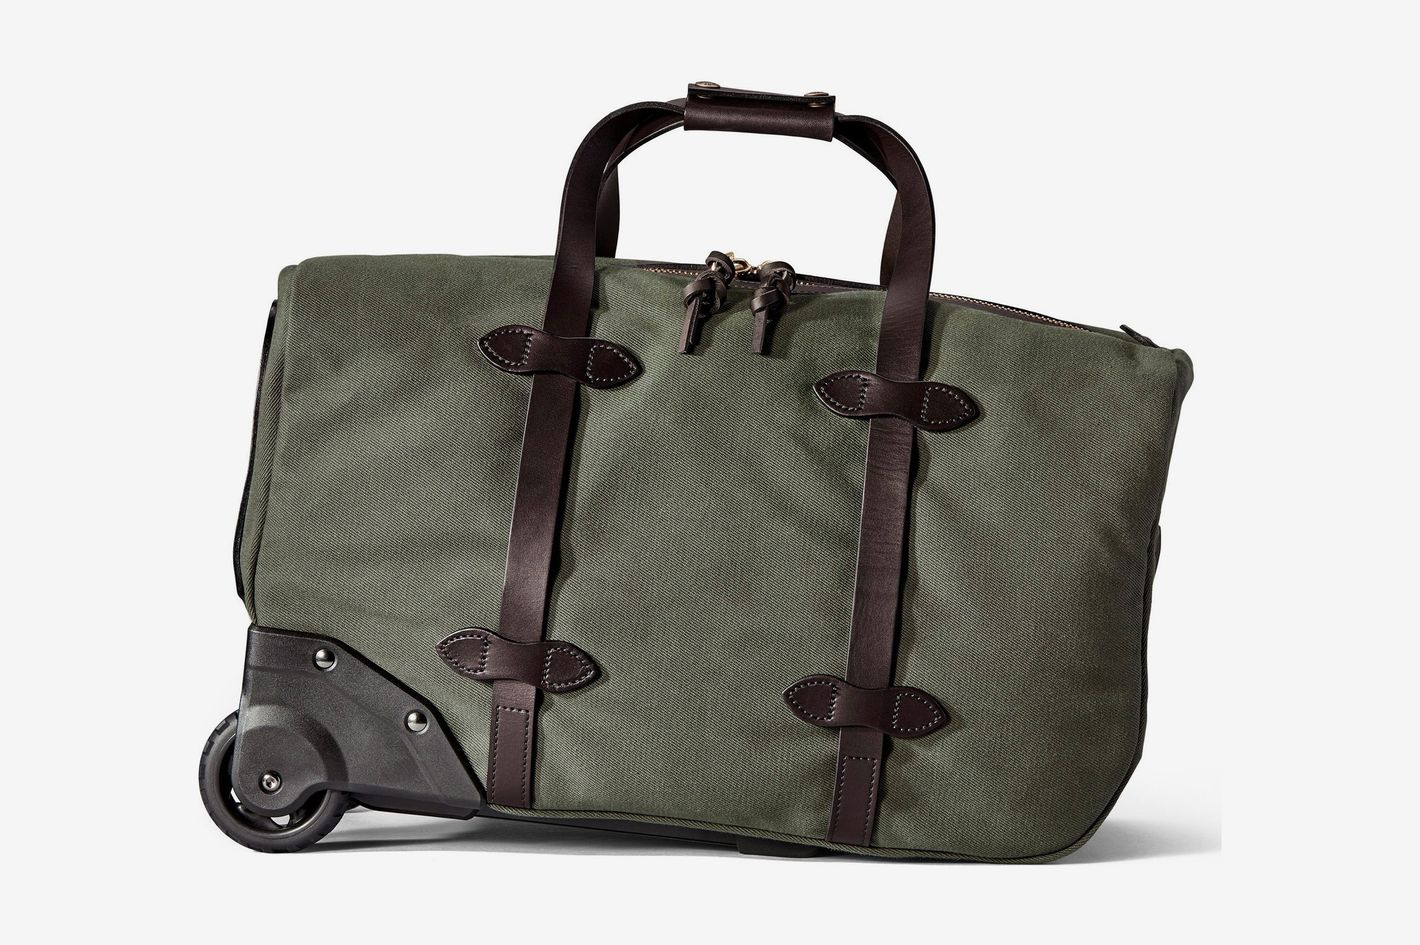 The 13 Best Duffel Bags for Travel 2018